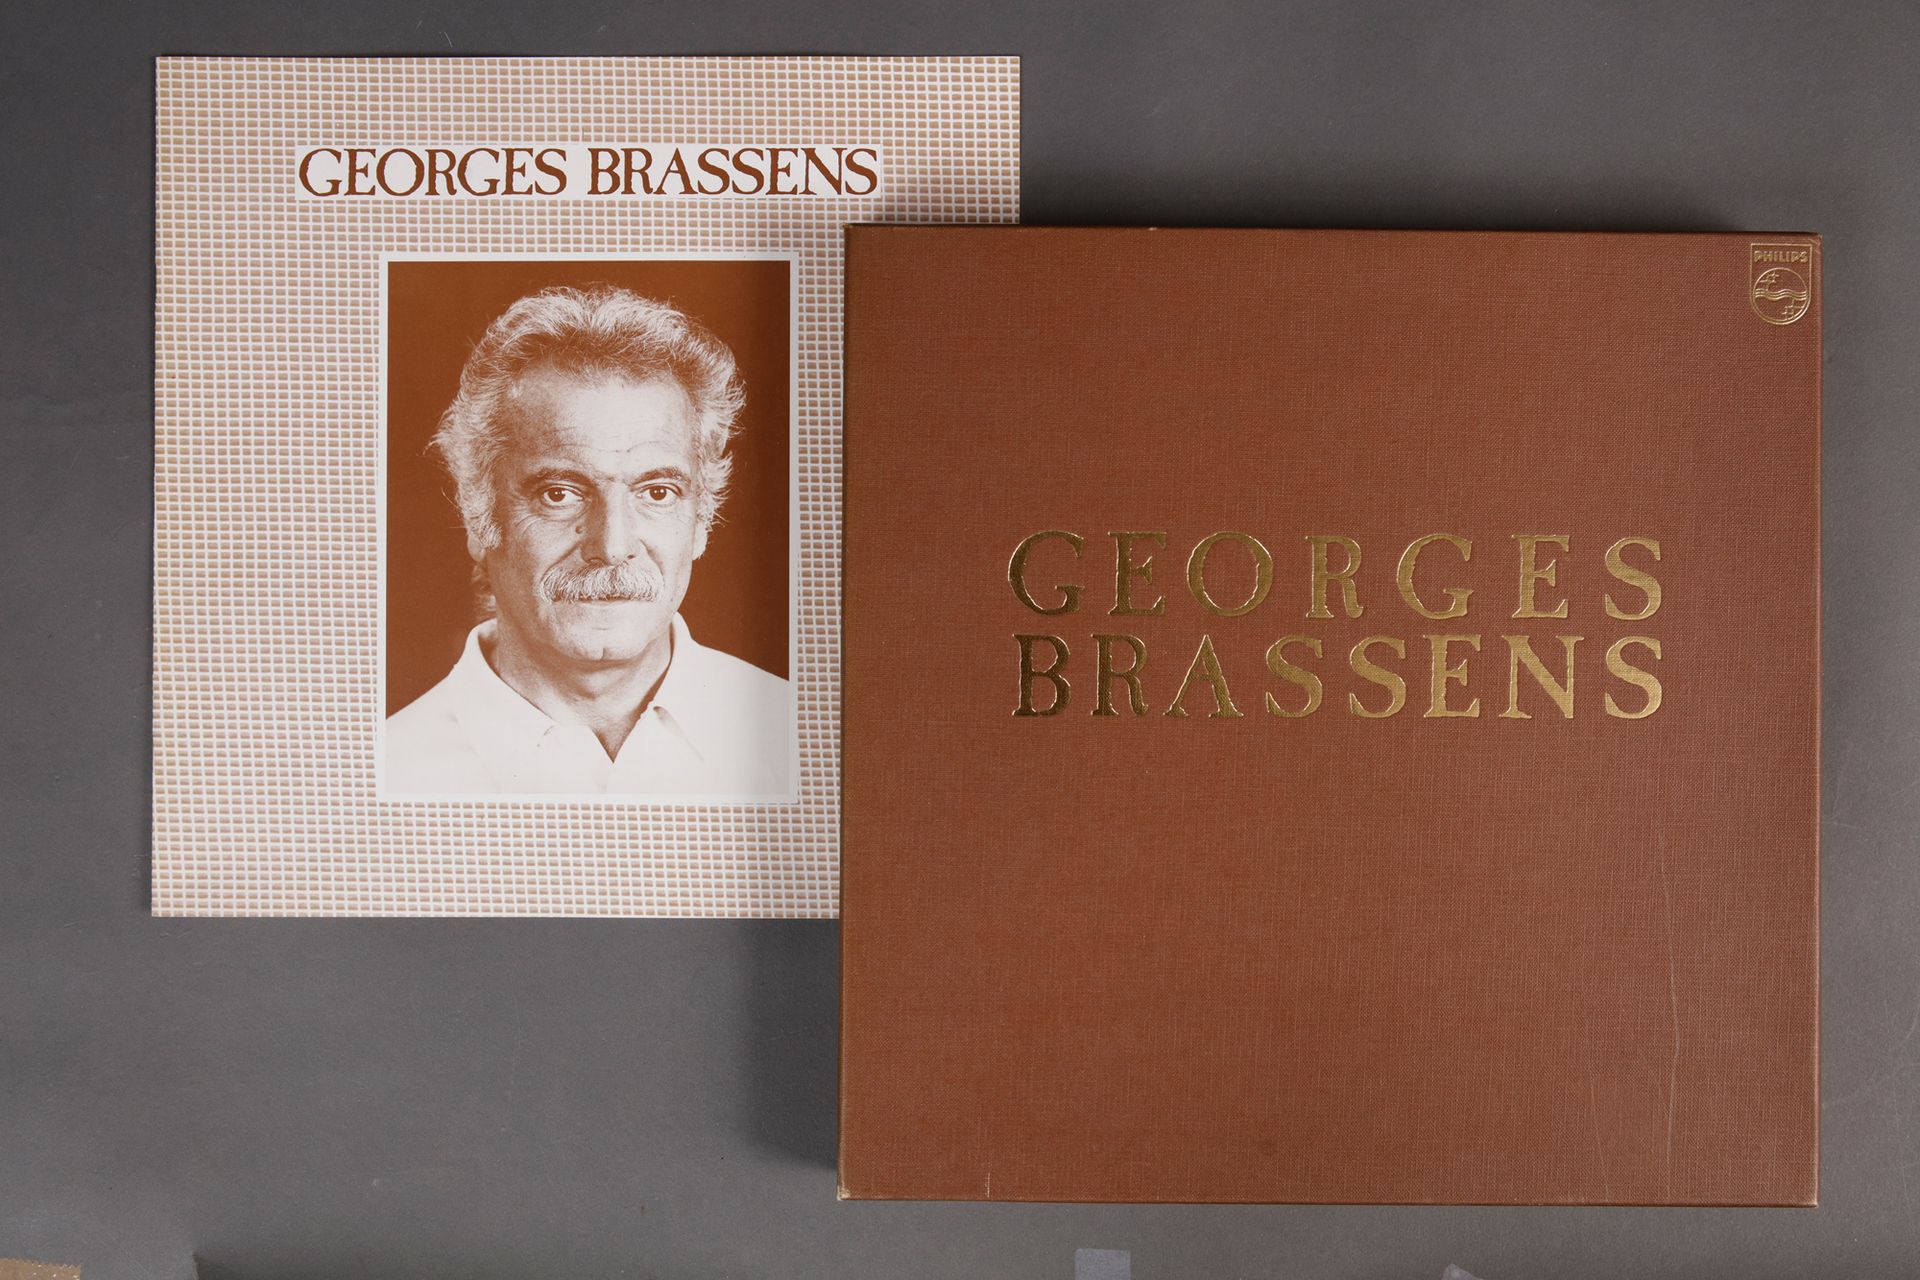 Null GEORGES BRASSENS
1 box set with 12 vinyl 33 rpm records of Georges
Brassens&hellip;